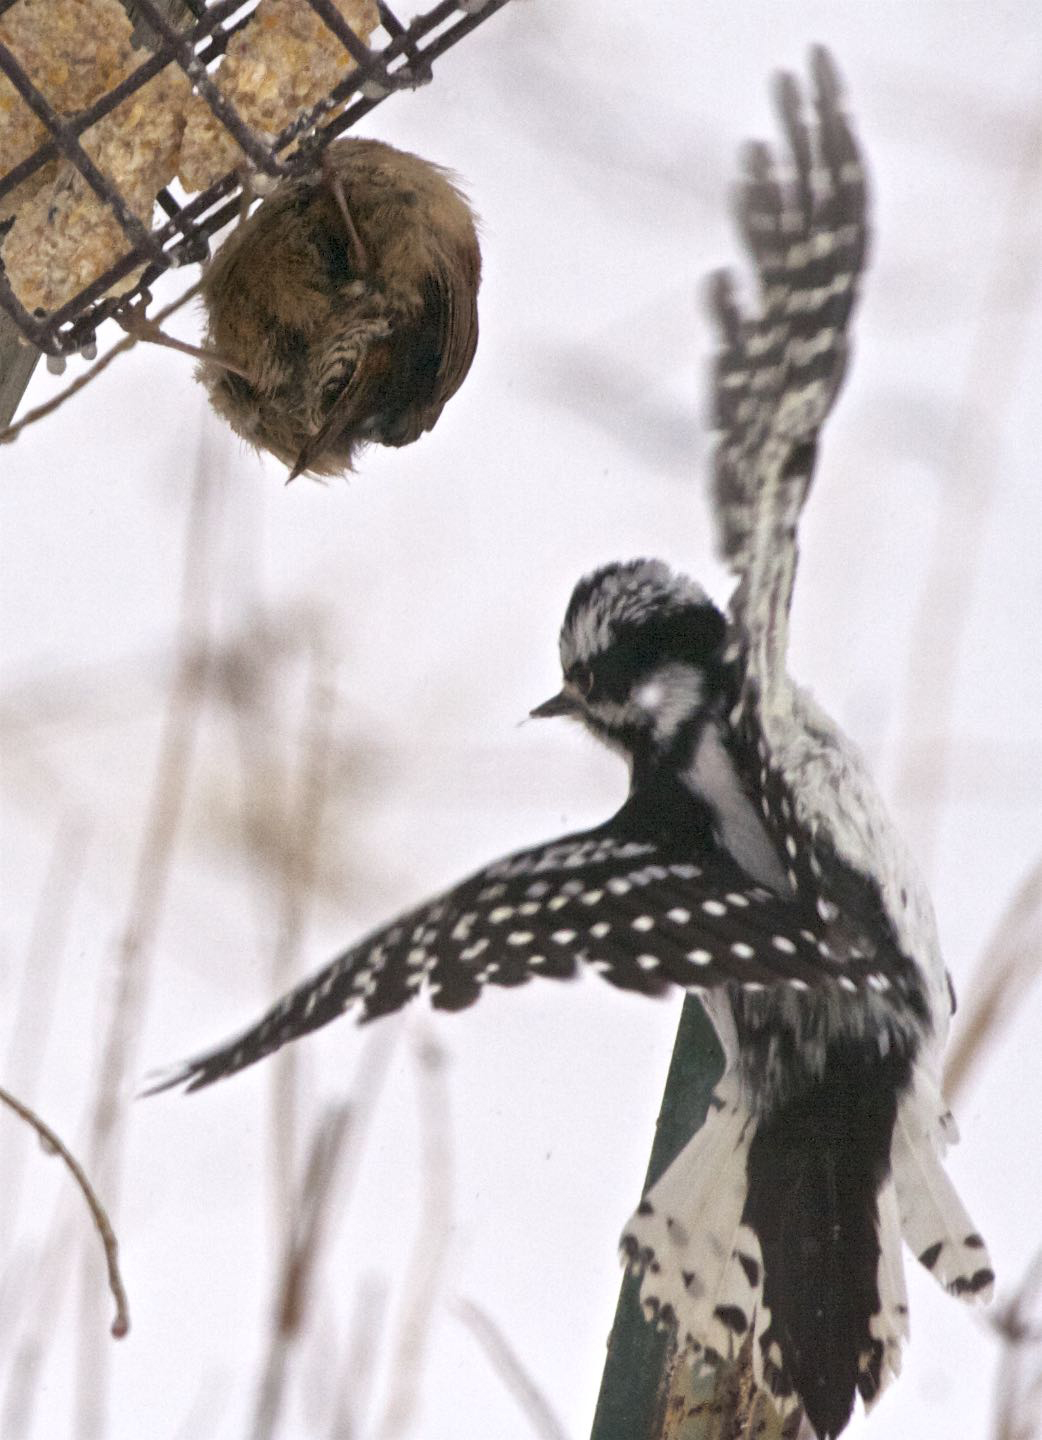 Downy Woodpecker and Hierarchy